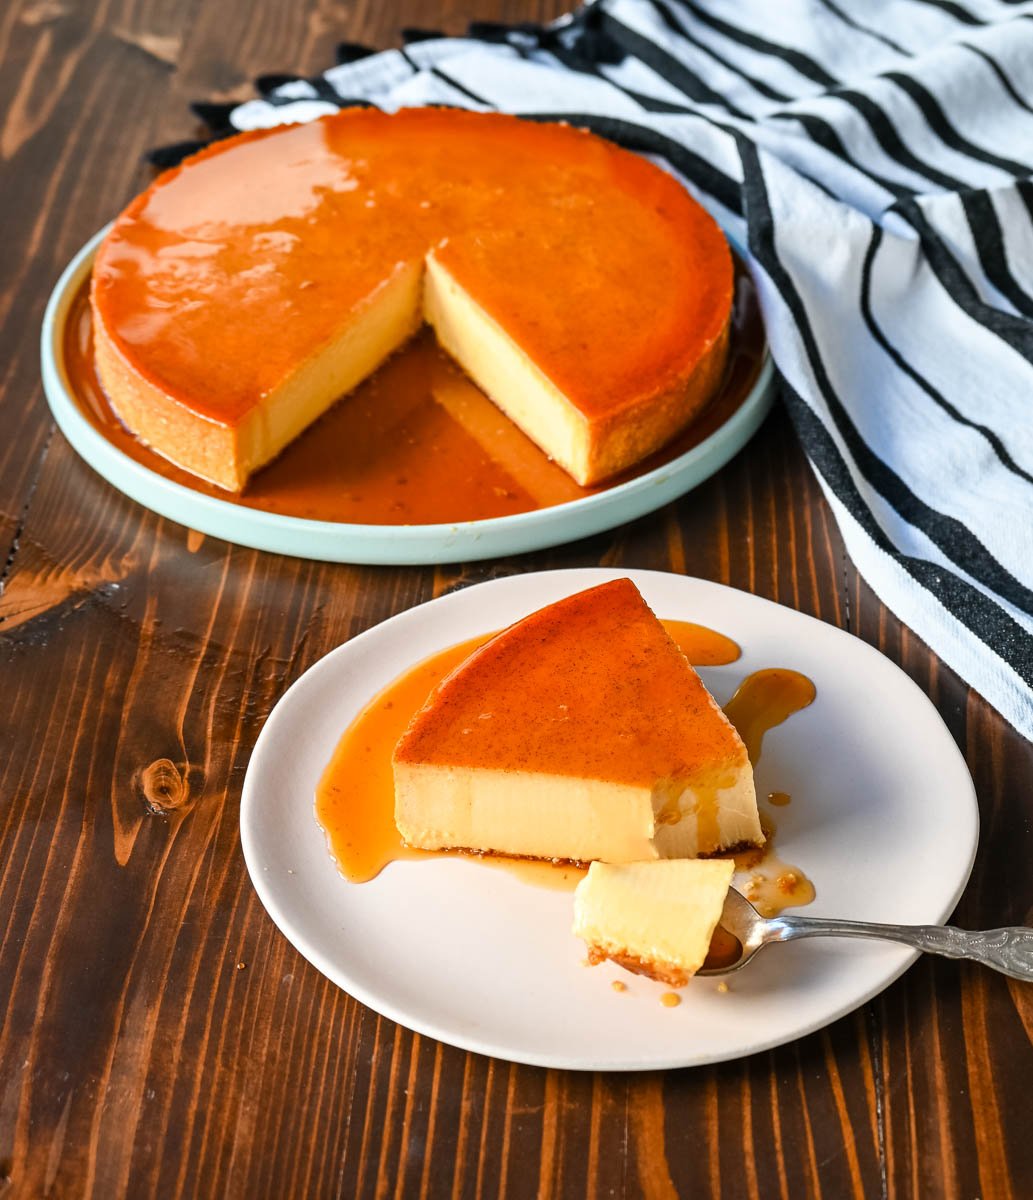 Caramel Flan Recipe. This is hands down the best Flan recipe ever! This flan recipe has the smoothest, creamiest custard and topped with caramelized sugar. This is my neighbor's famous recipe that she has been making for over 60 years!